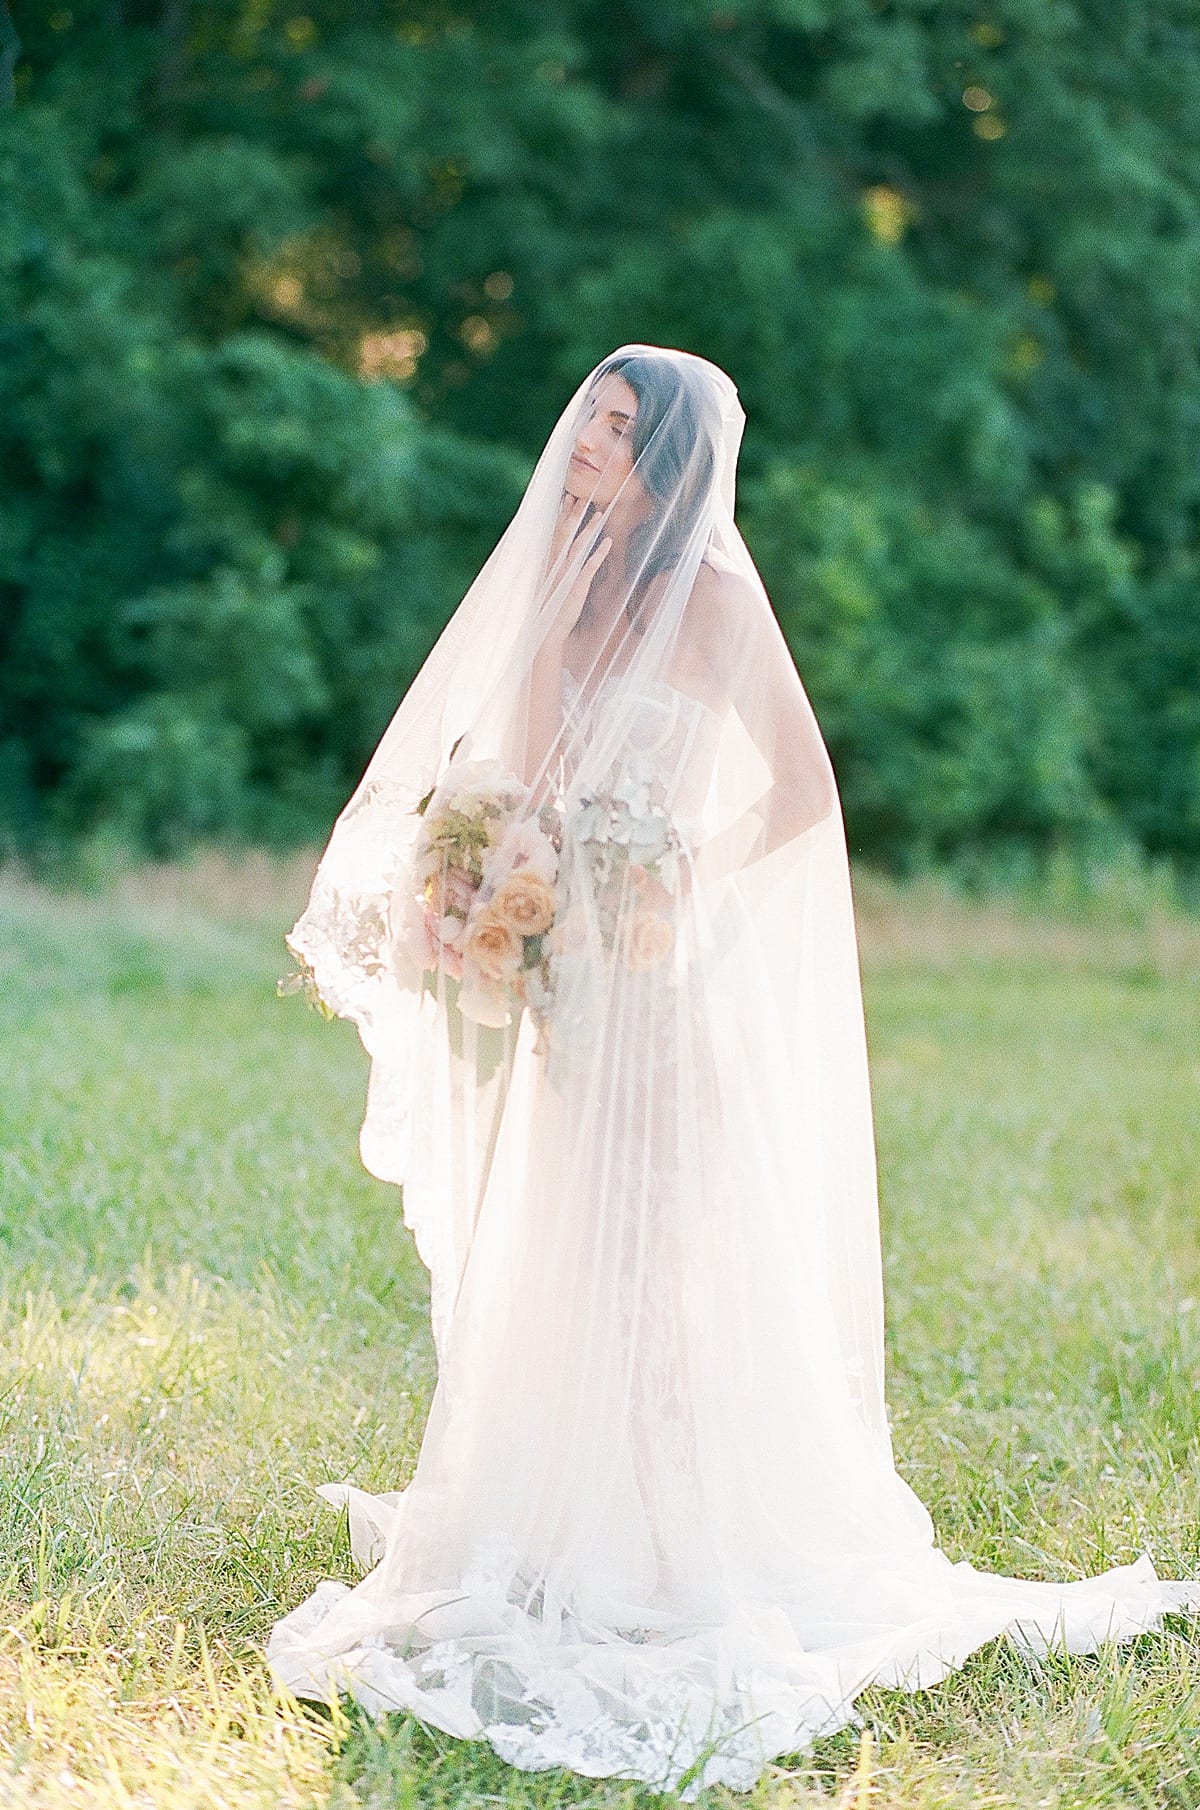 Bride in Alon Livne White Gown with Veil Photo 